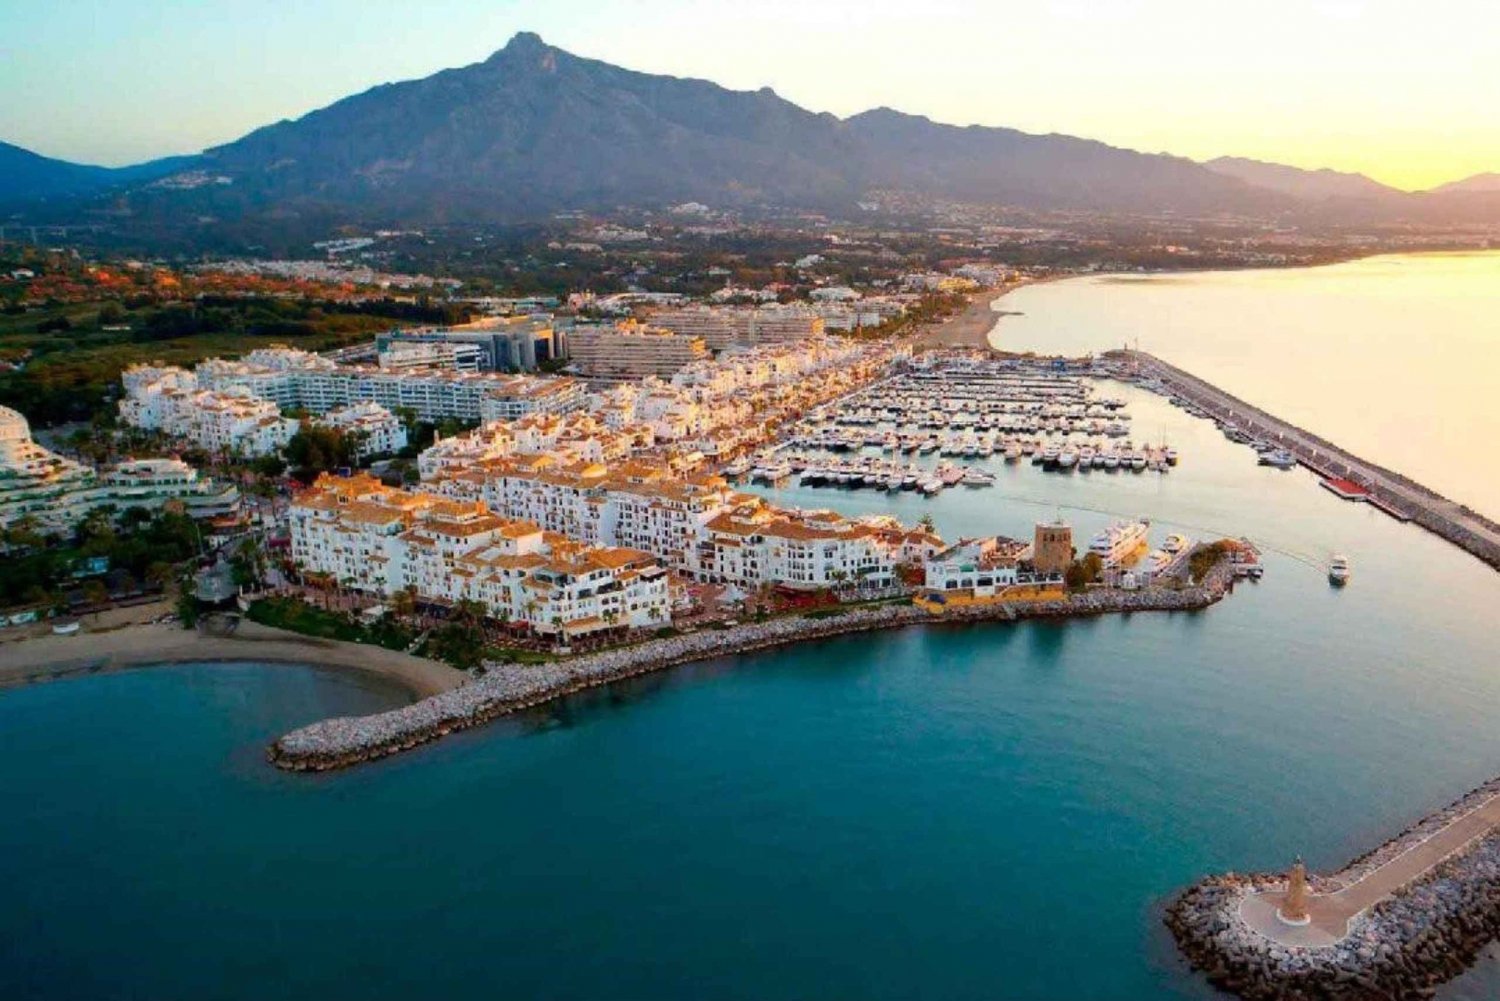 From Malaga: Private guided tour of Marbella, Mijas, Banús